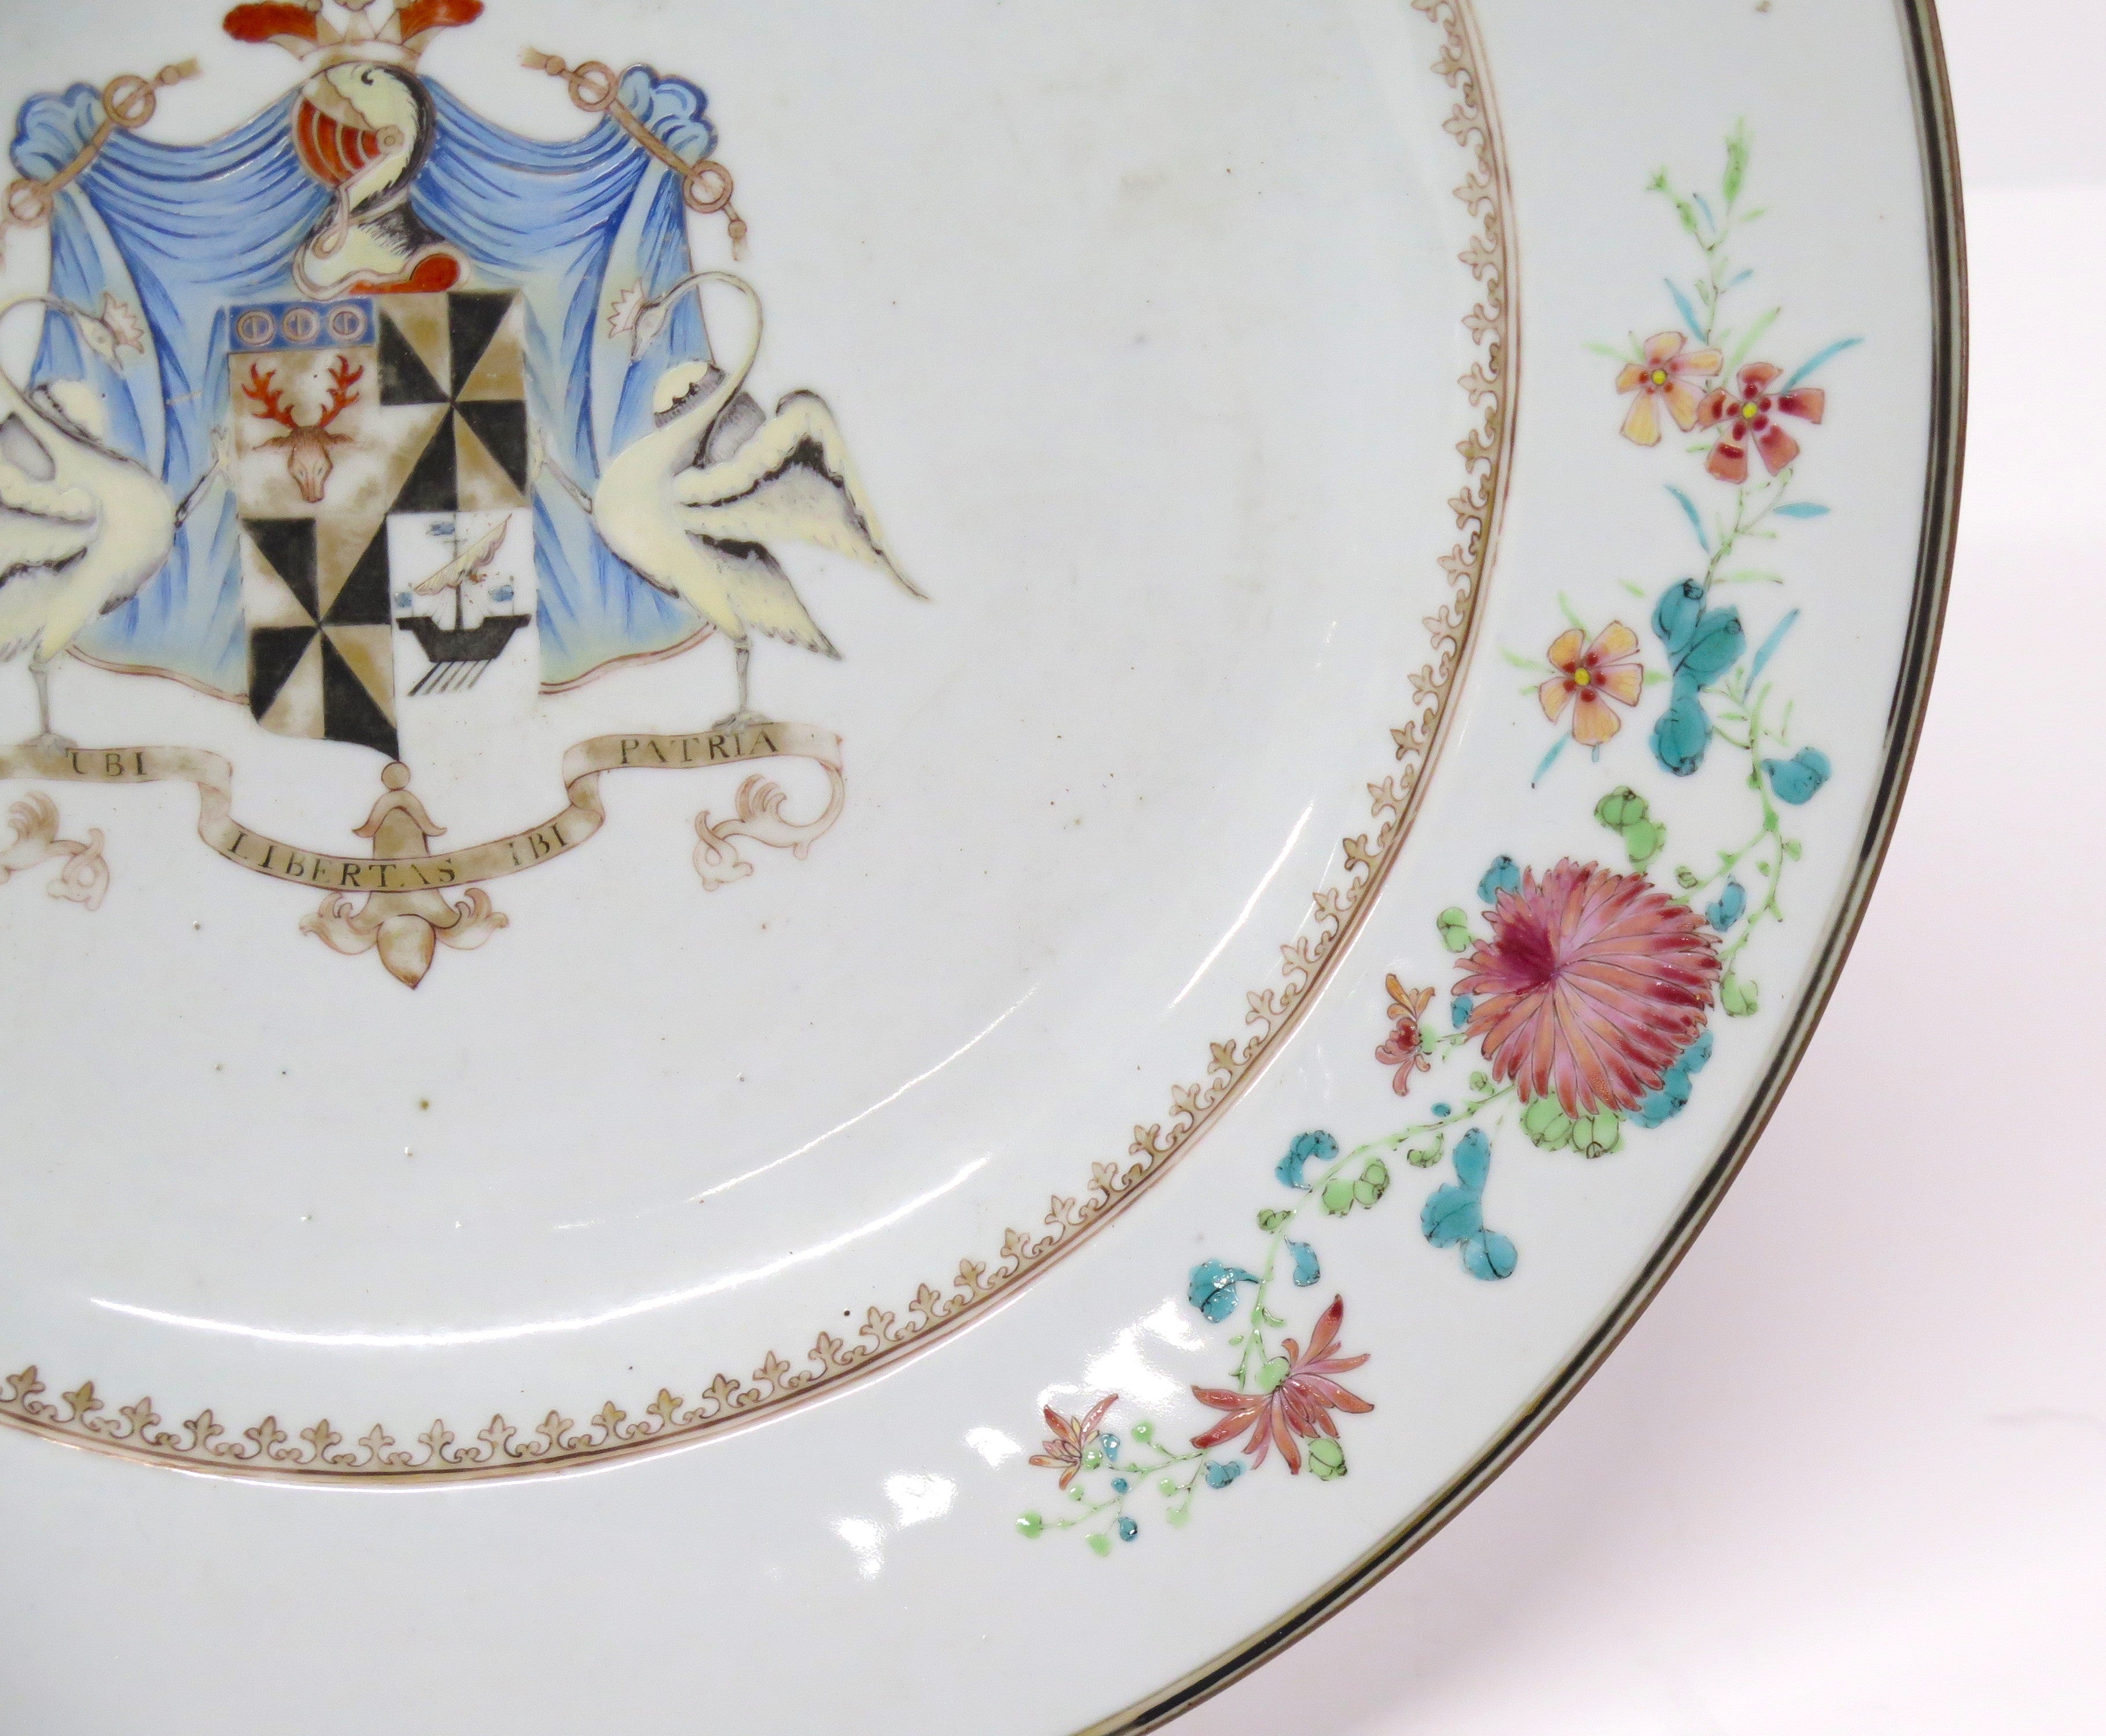 A Beautifully Enameled Chinese Porcelain Emorial Charger